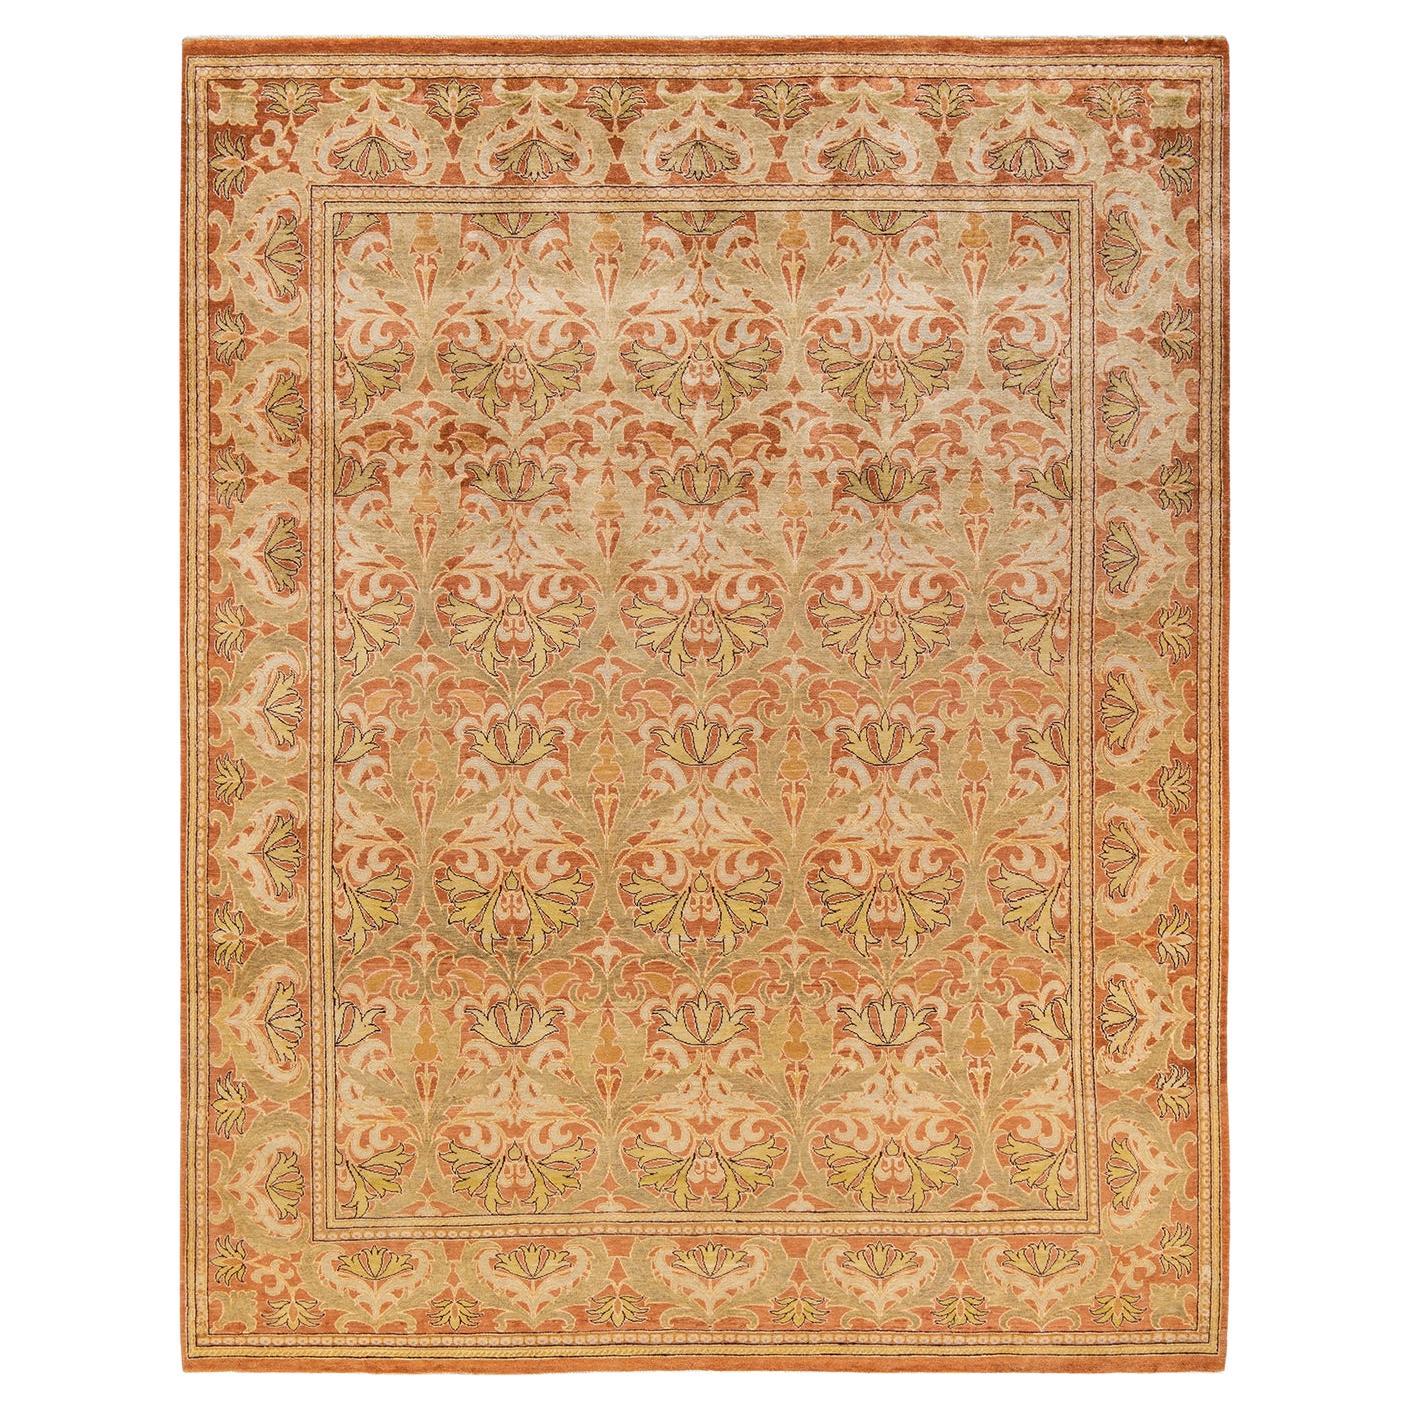 One-of-a-kind Hand Knotted Oriental Eclectic Orange Area Rug